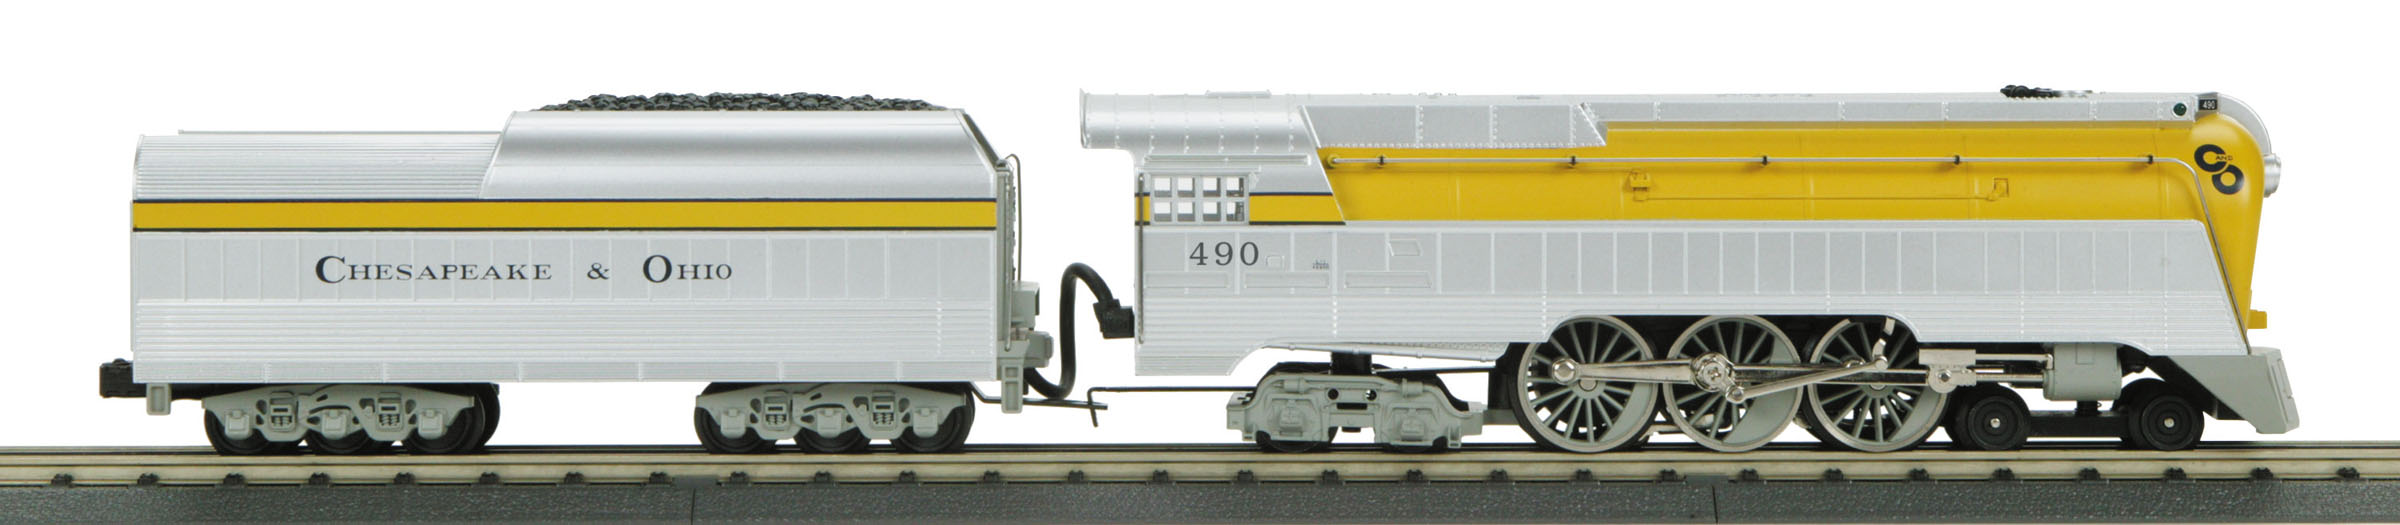 30-1412-1 MTH ELECTRIC TRAINS